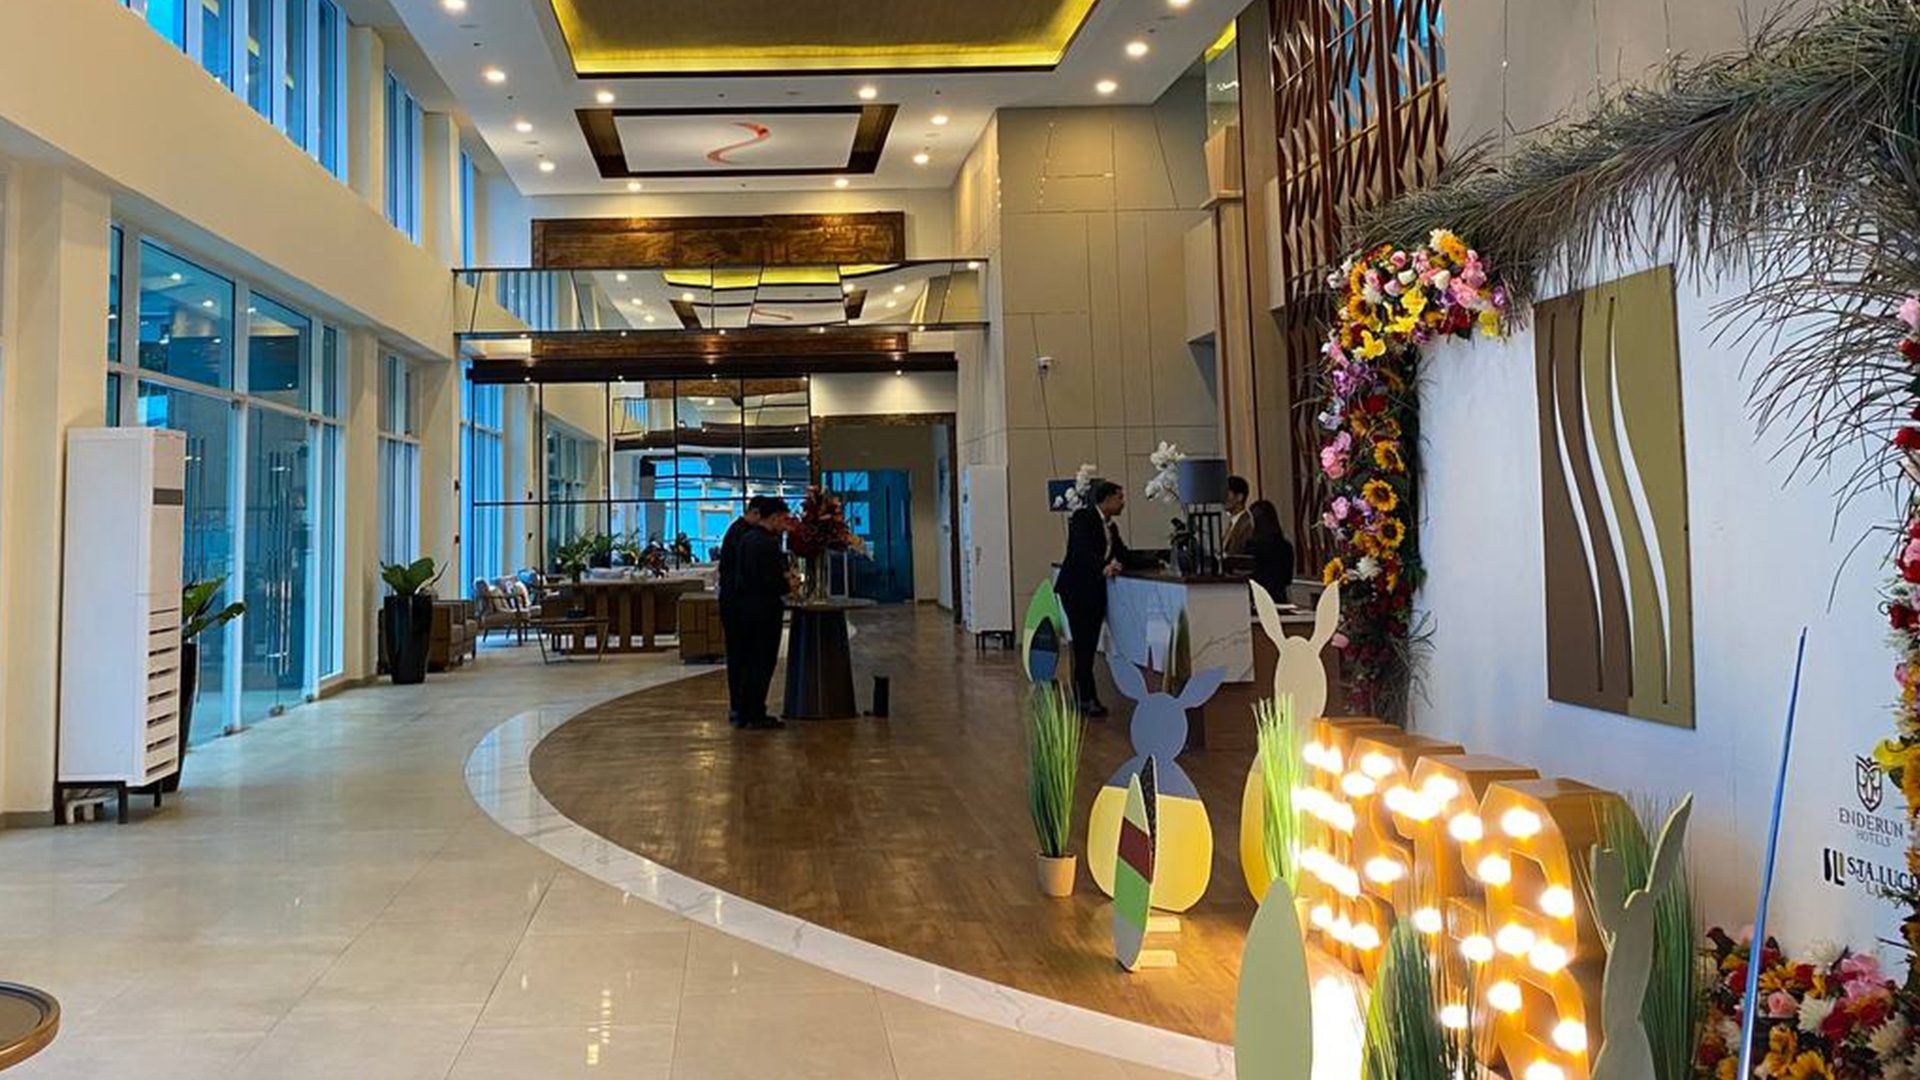 LOOK: This new Baguio hotel is a modern respite in the heart of the city